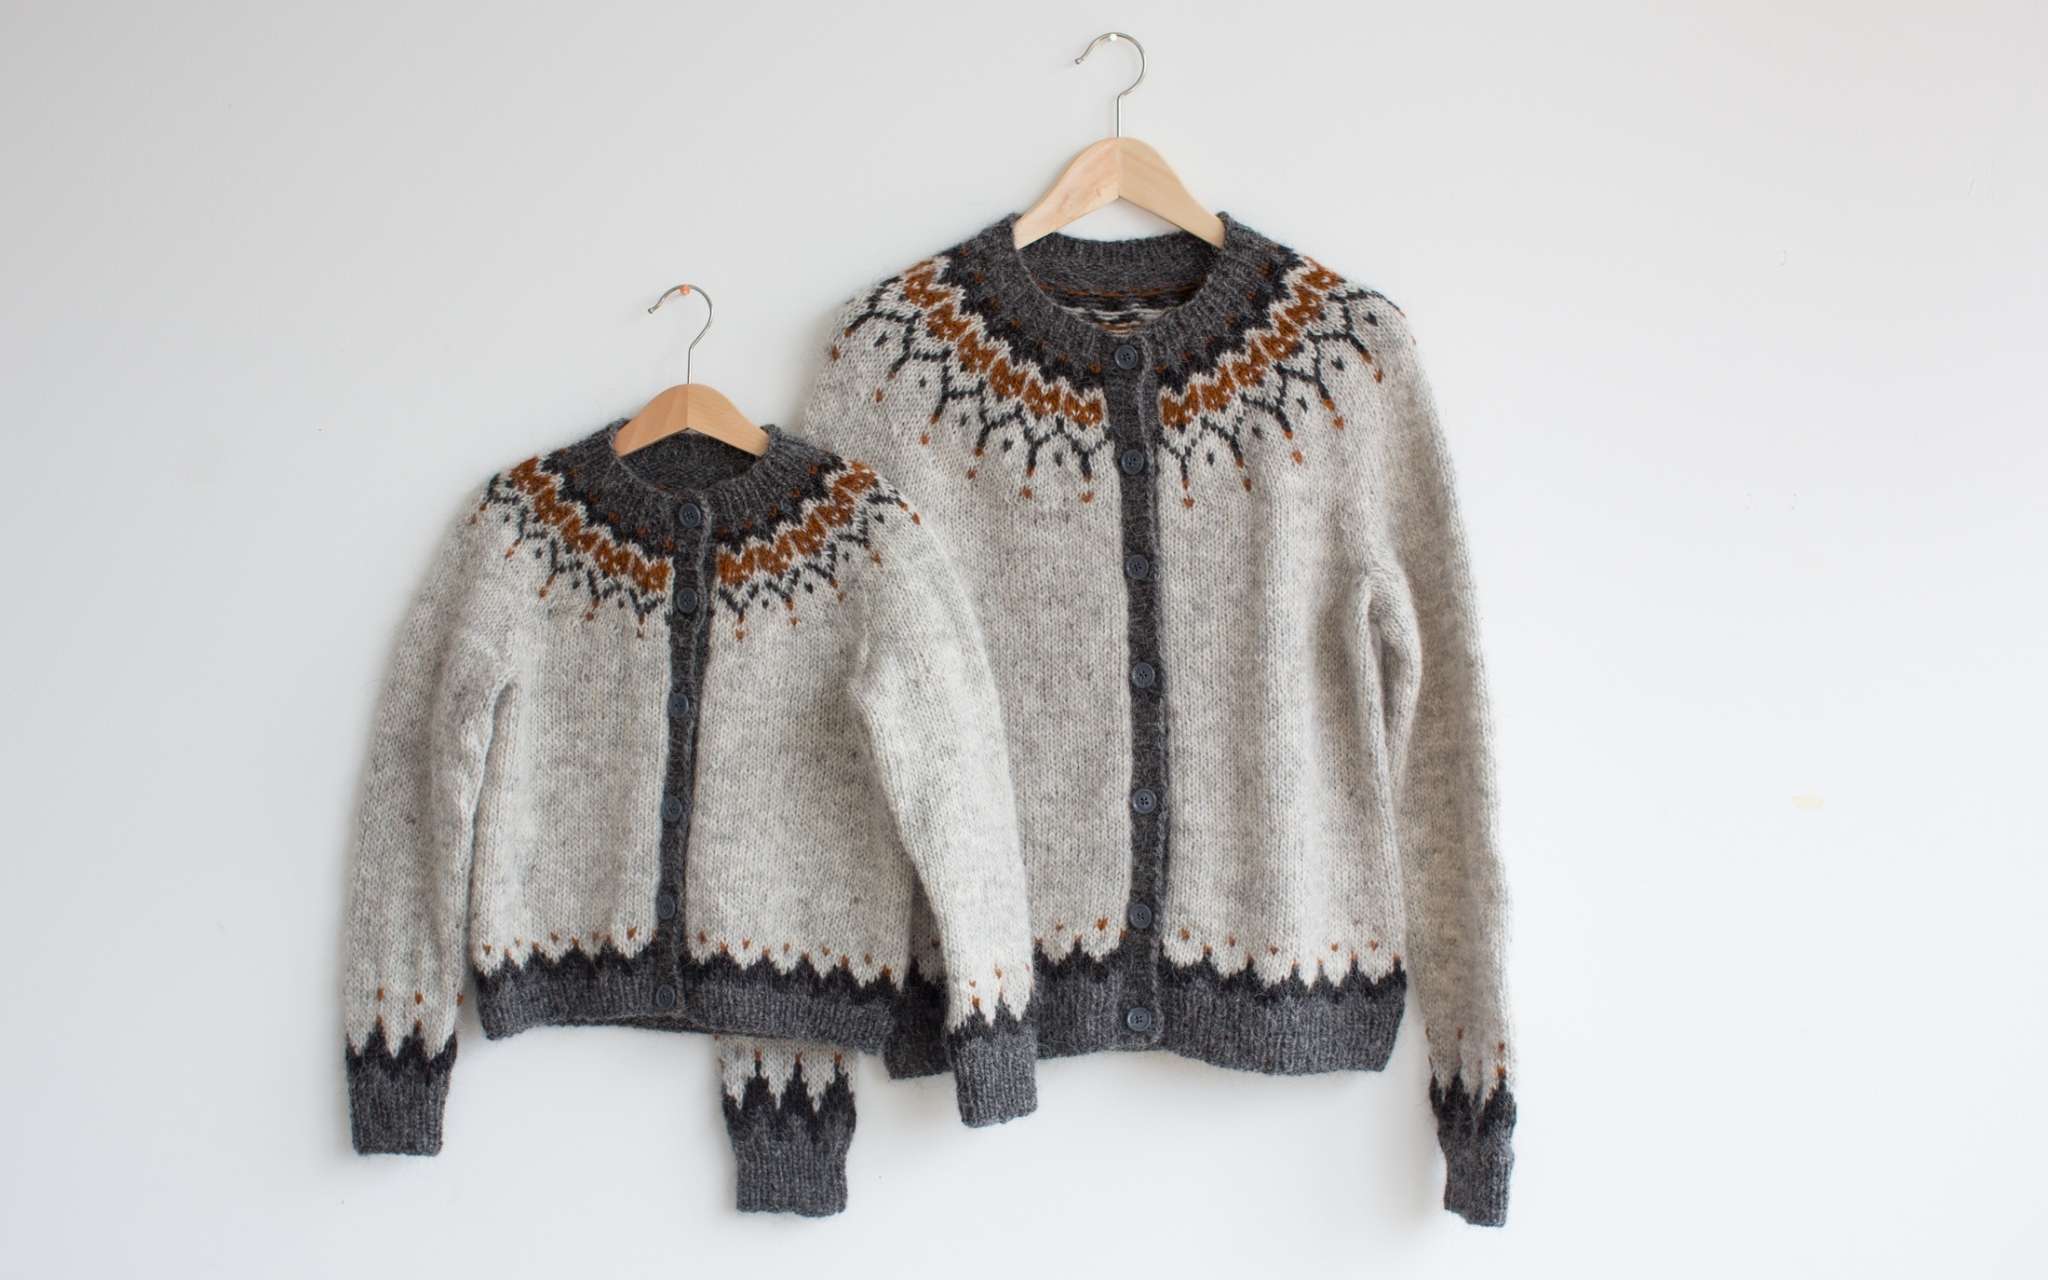 Matching adult and kid sweaters hang on wooden clothes hangers, overlapping against a wall. Both sweaters are grey, with a darker grey and orange colourwork yoke pattern.